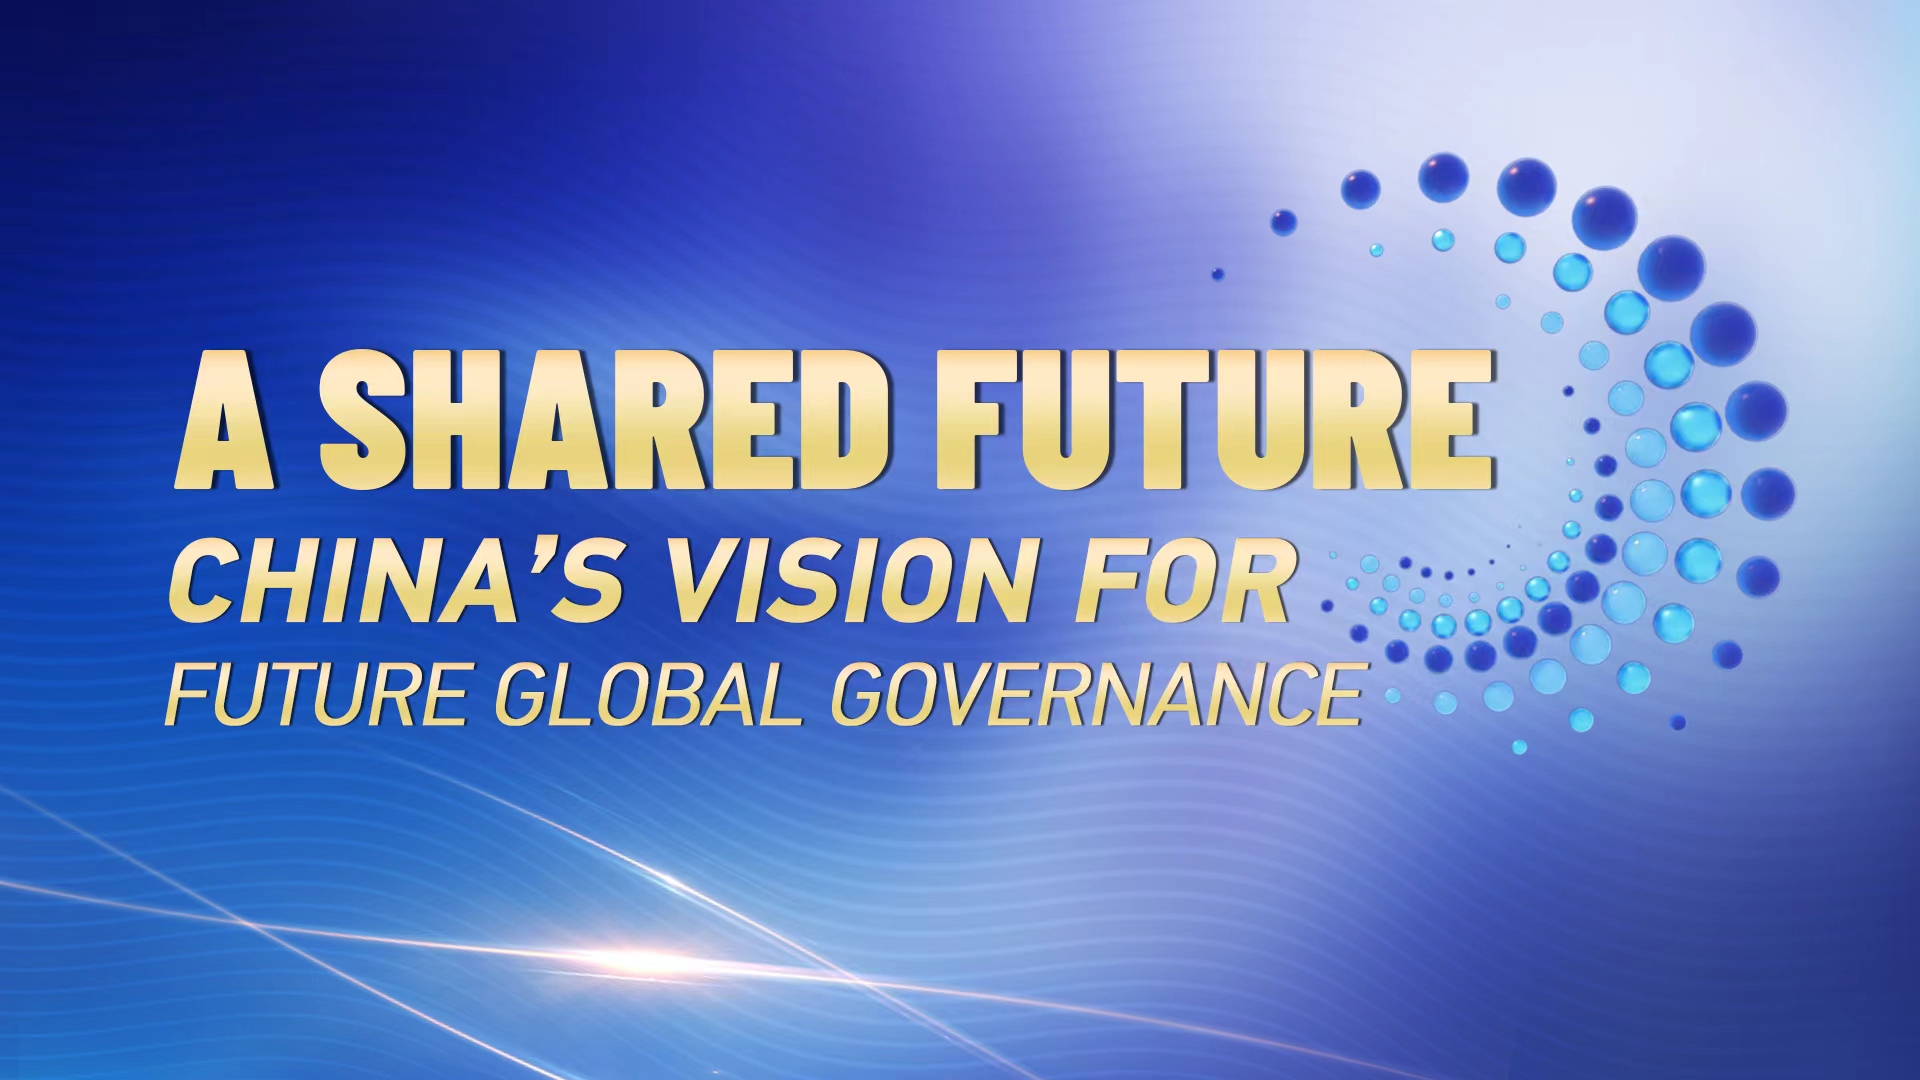 Live: Our World Forum - 'A Shared Future: China's Vision for Future Global Governance'